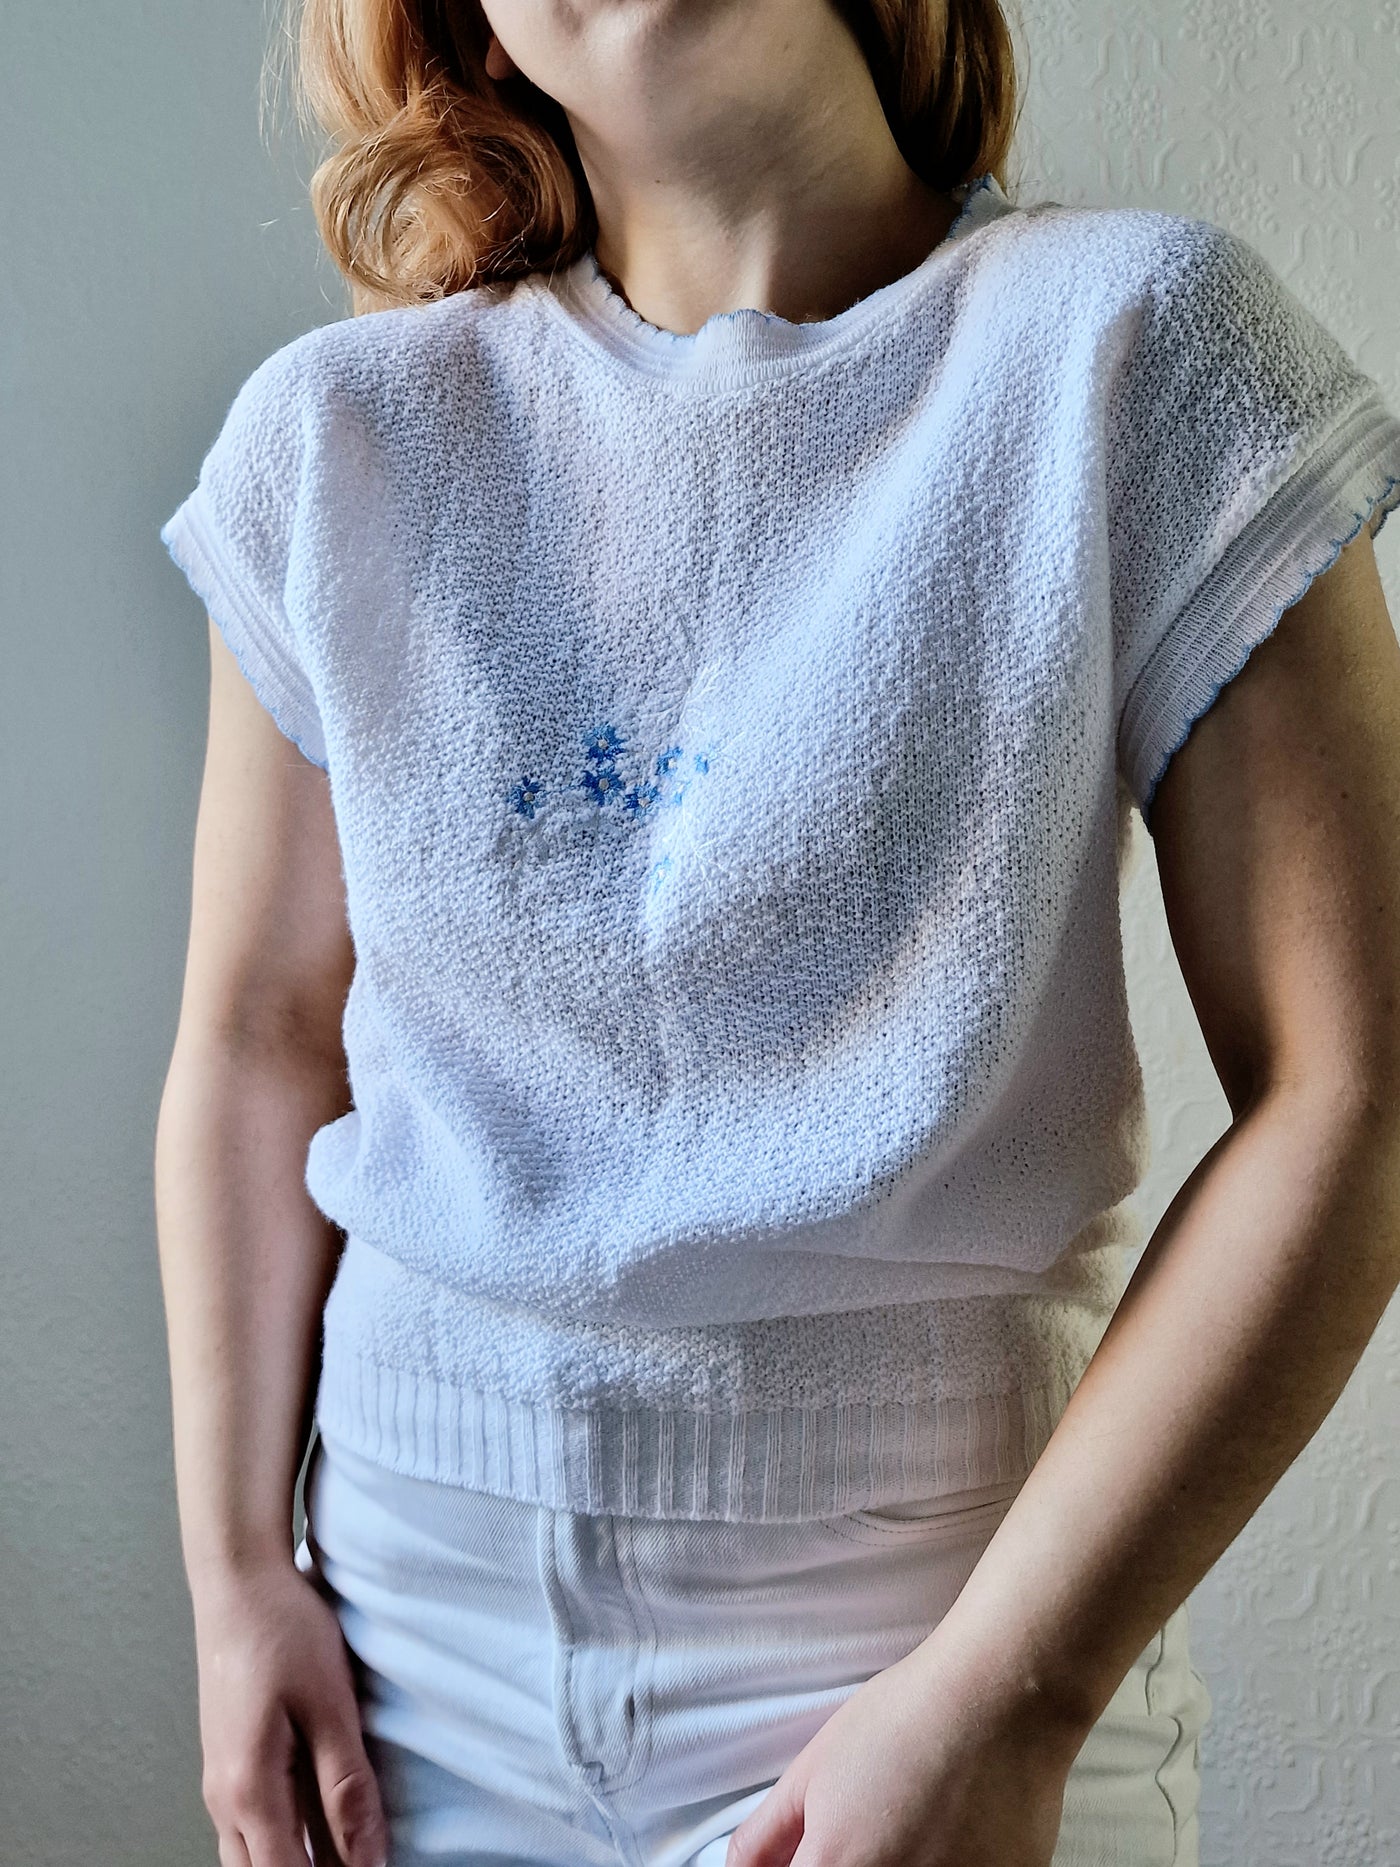 Vintage 80s White Crew Neck Knitted Jumper Top with Blue Floral Embroidery - S